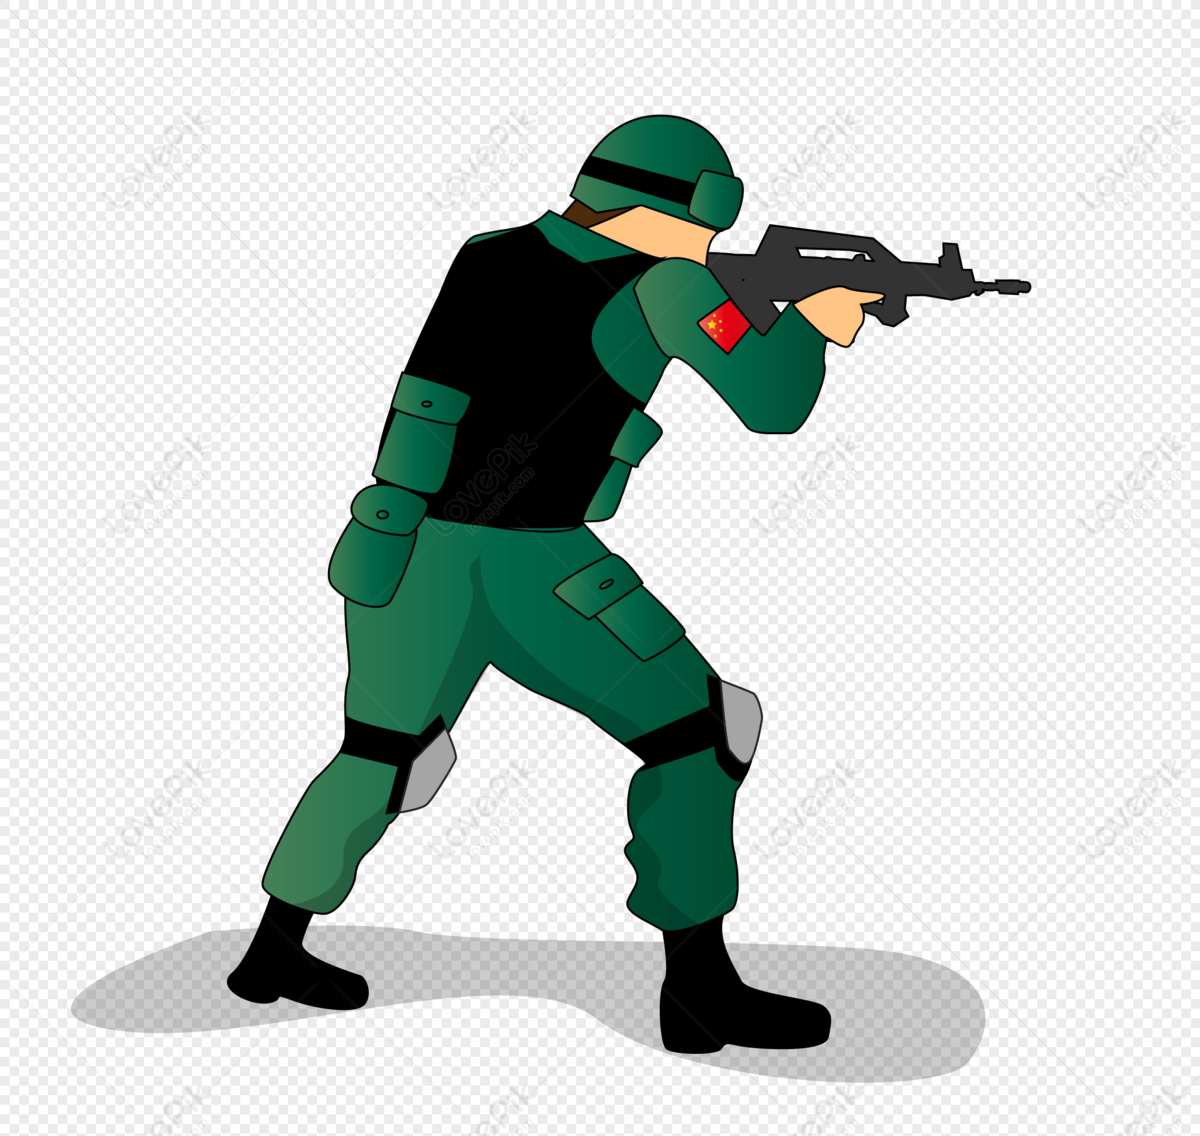 Flat Army Soldier Shooting Pose PNG Transparent Background And Clipart  Image For Free Download - Lovepik | 401336240